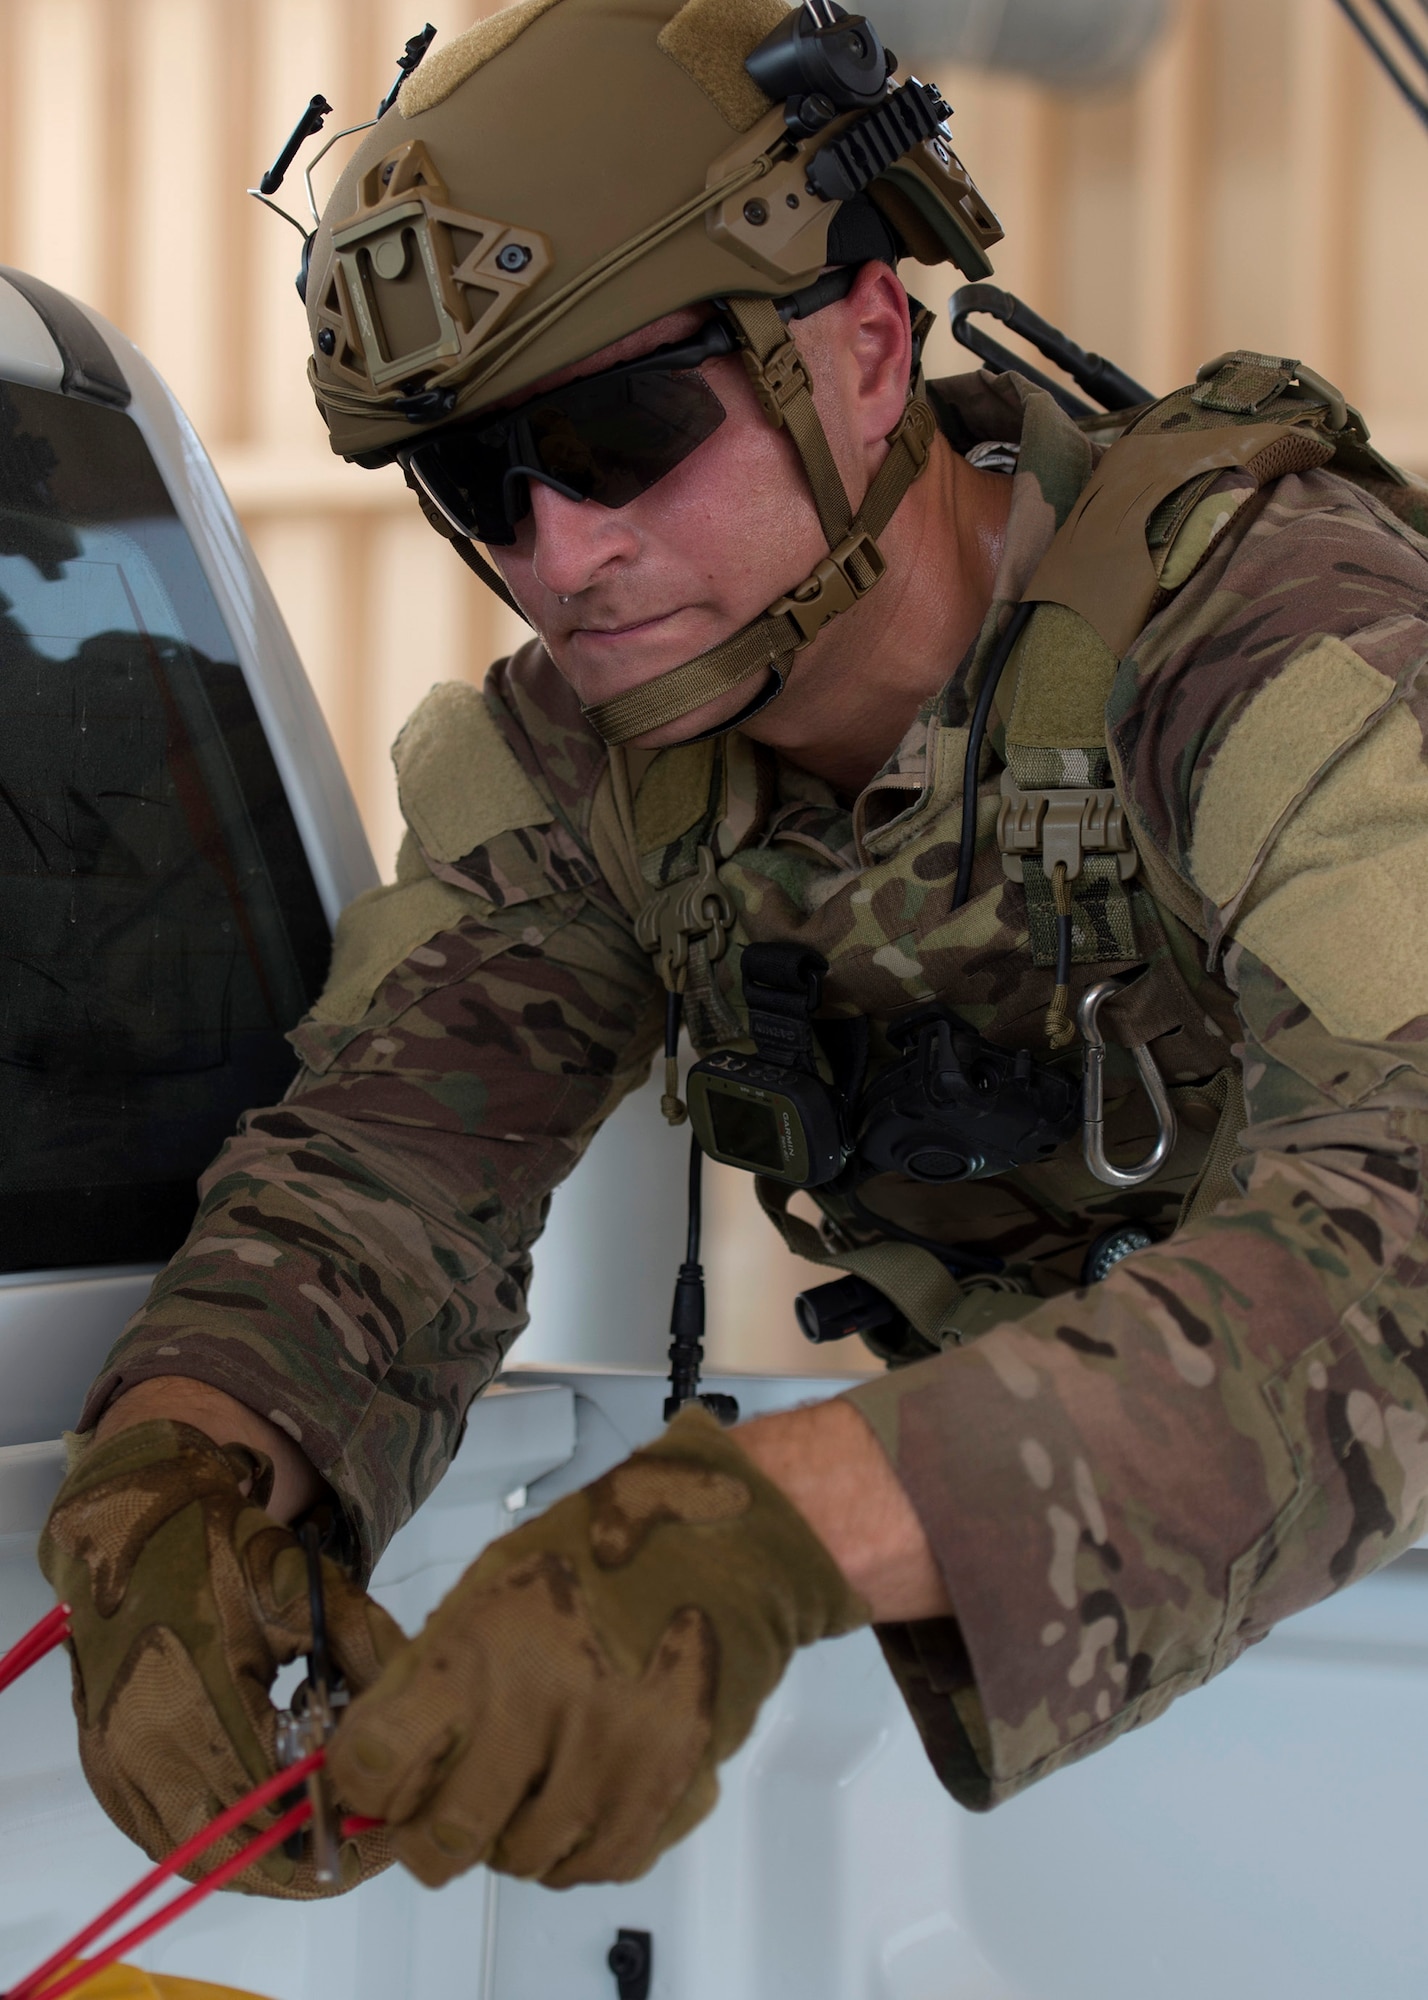 U.S. Air Force Staff Sgt. Brian Vosper, team leader with the 379th Expeditionary Civil Engineer Squadron Explosive Ordnance Disposal Flight, cuts the wires to a simulated explosive device at Al Udeid Air Base, Qatar, Aug. 26, 2017.